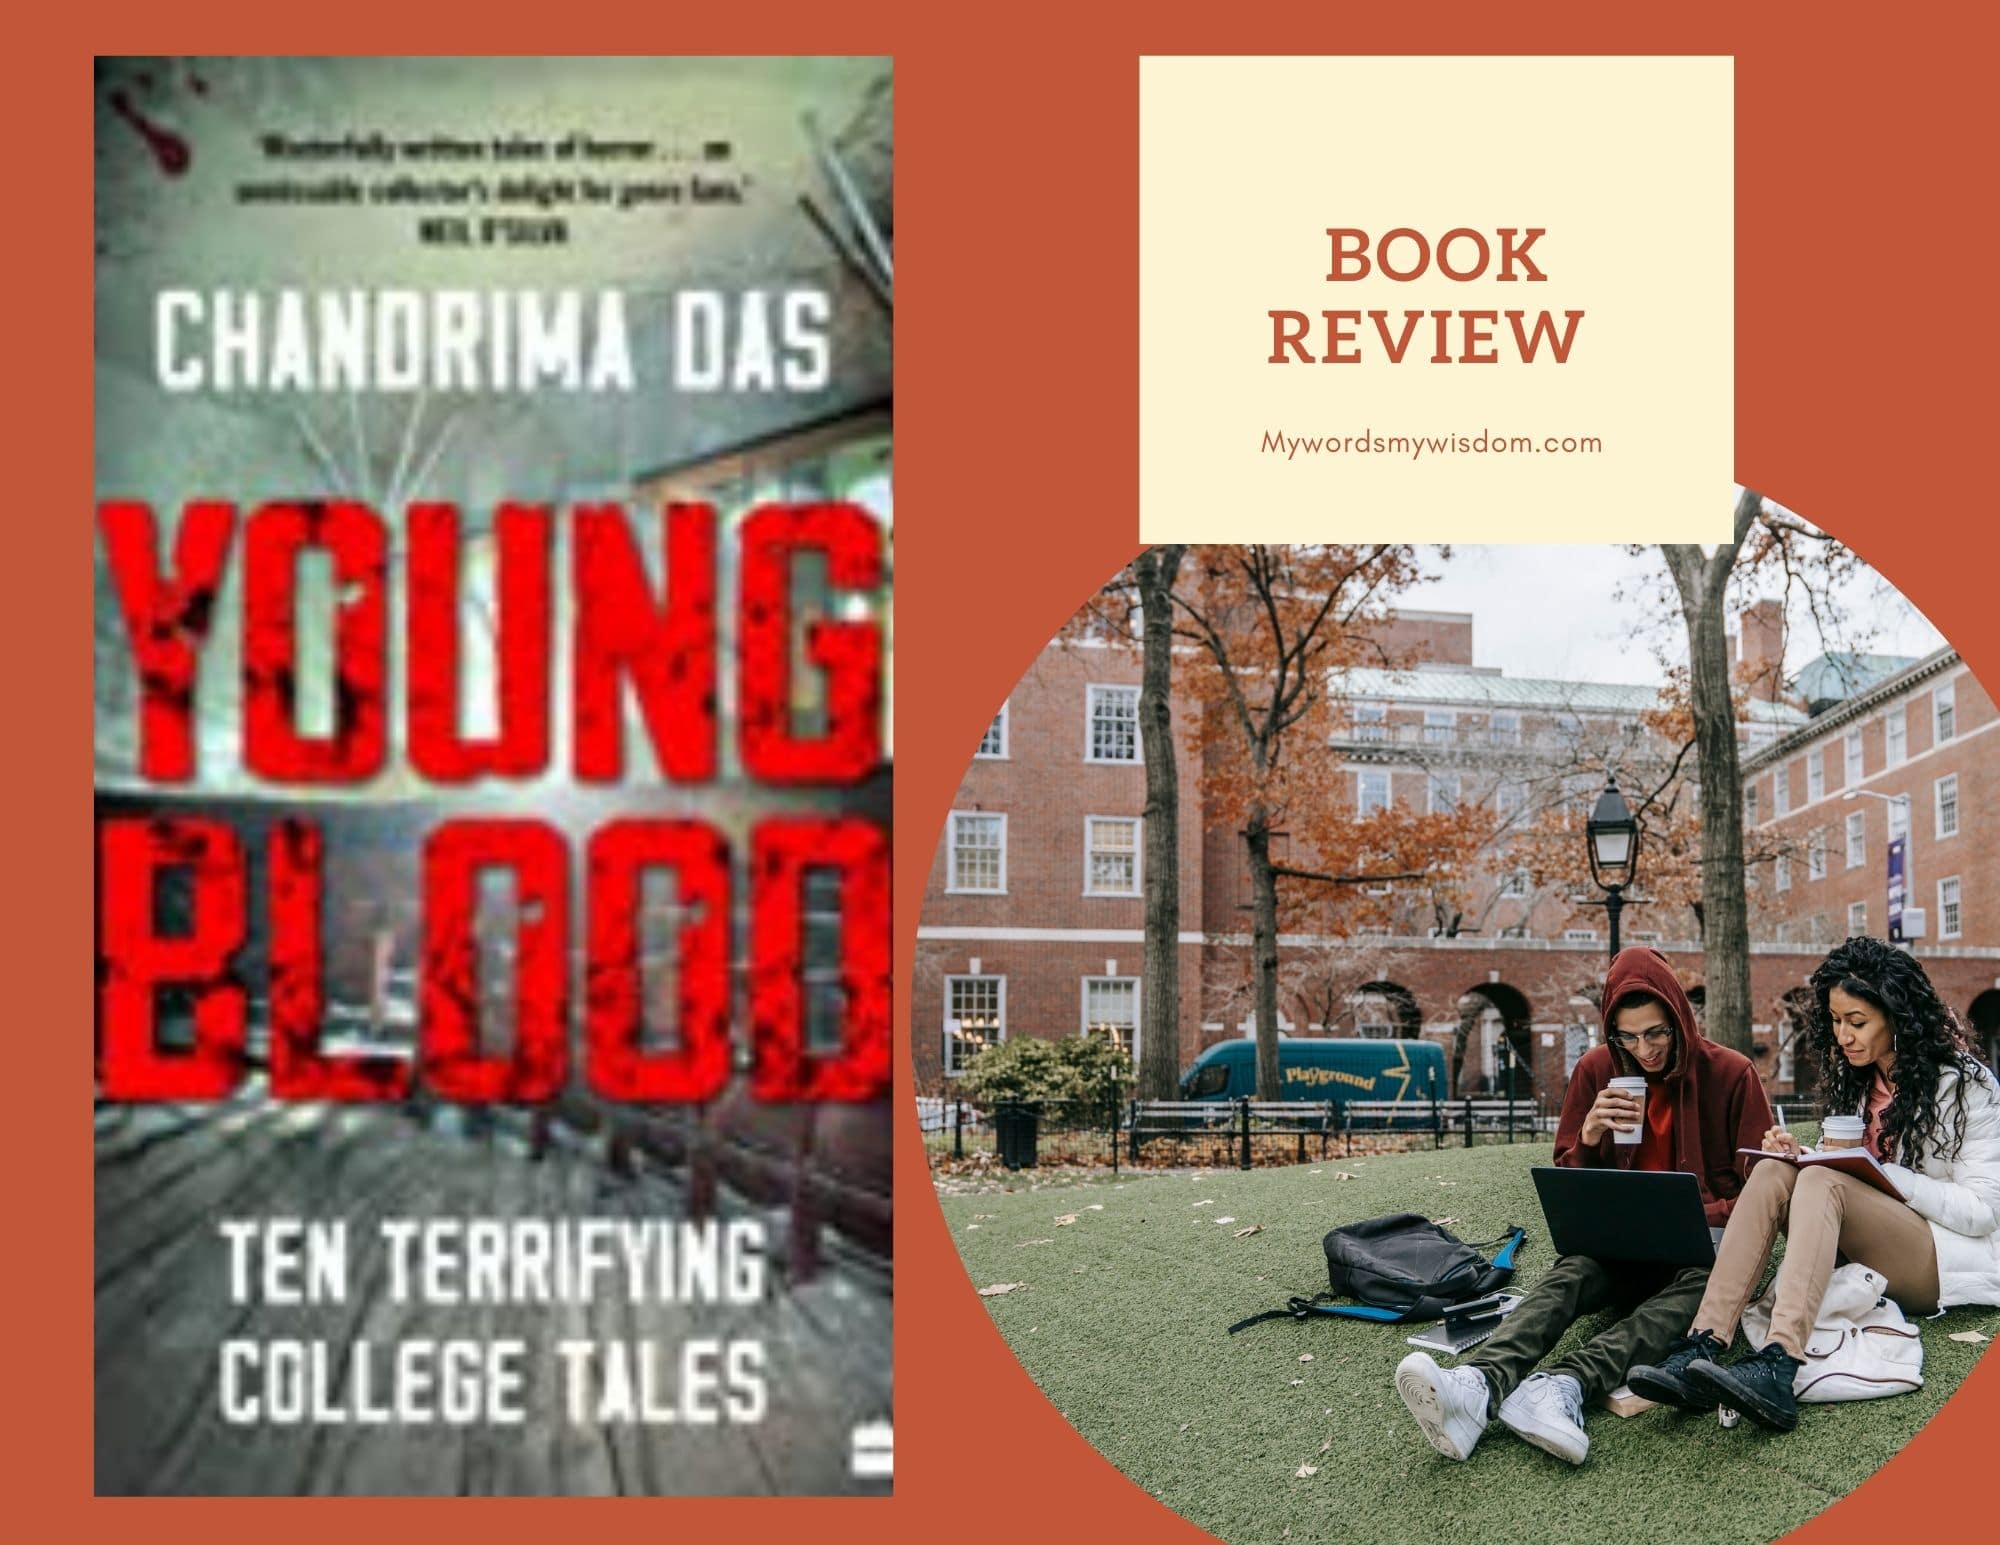 You are currently viewing Young Blood, By chandirma das #bookreview #bookchatter